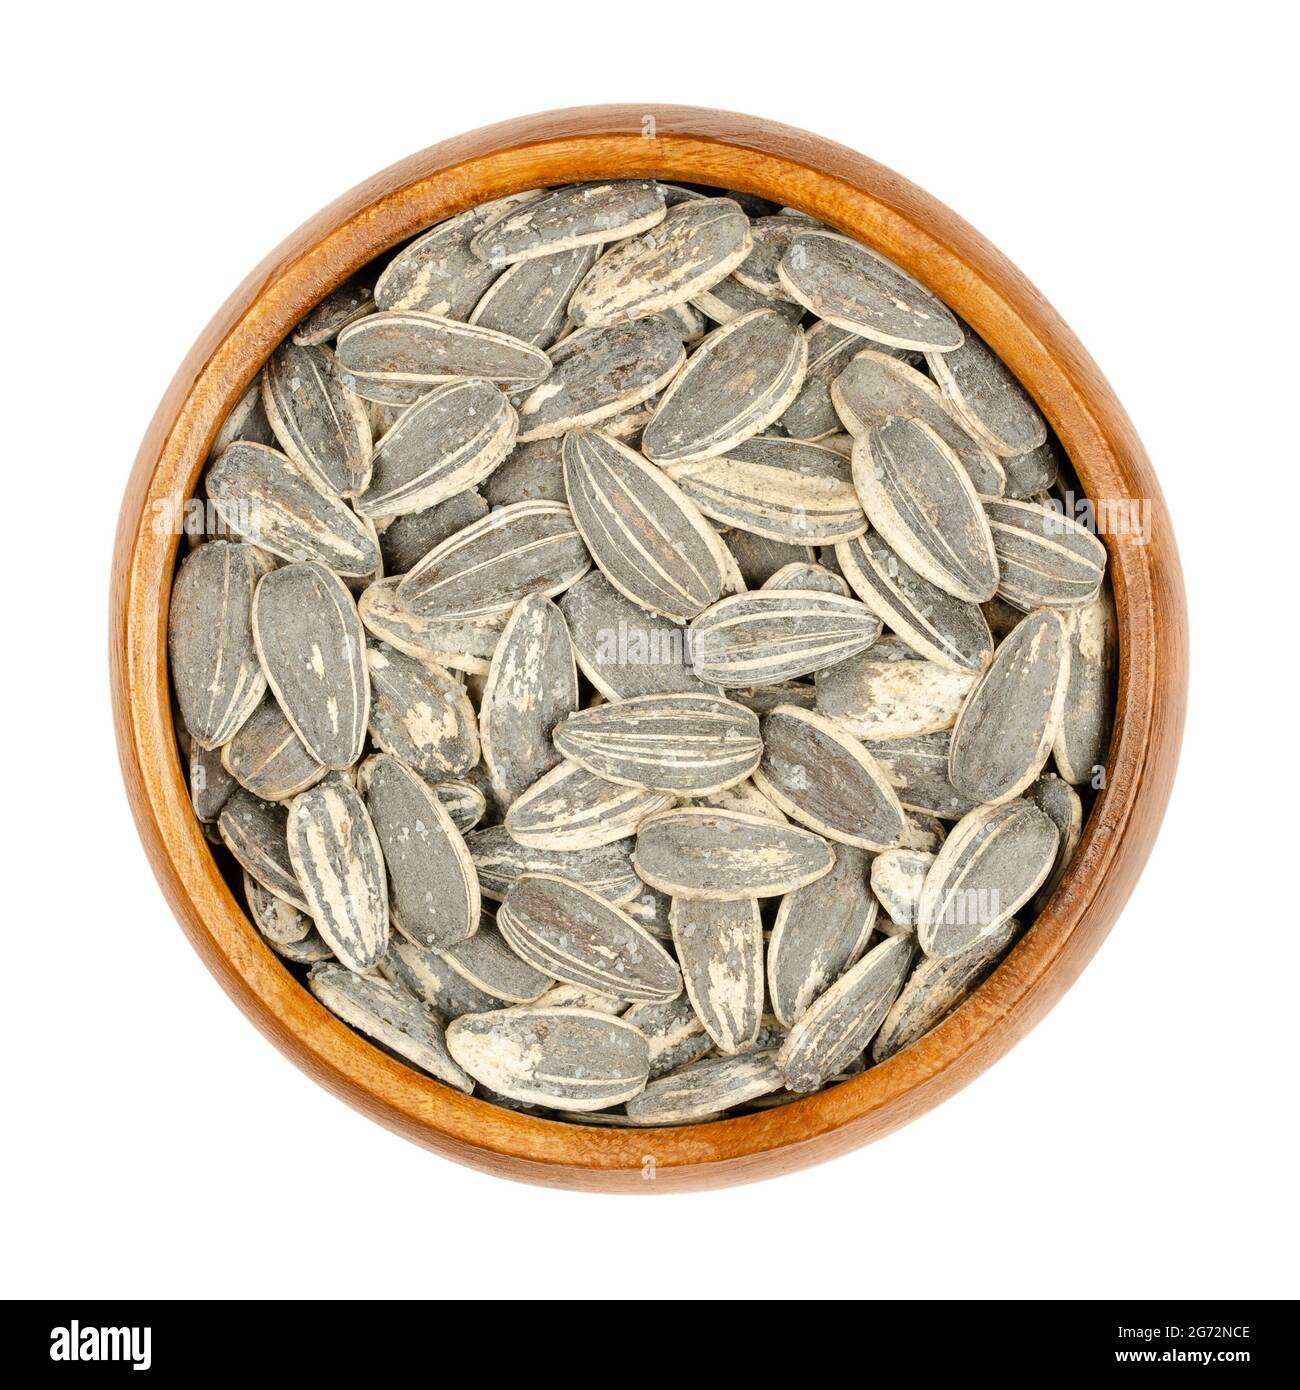 Large sunflower seeds in shells roasted and salted, in a wooden bowl. Whole striped common sunflower seeds, fruits of Helianthus Annuus. Stock Photo